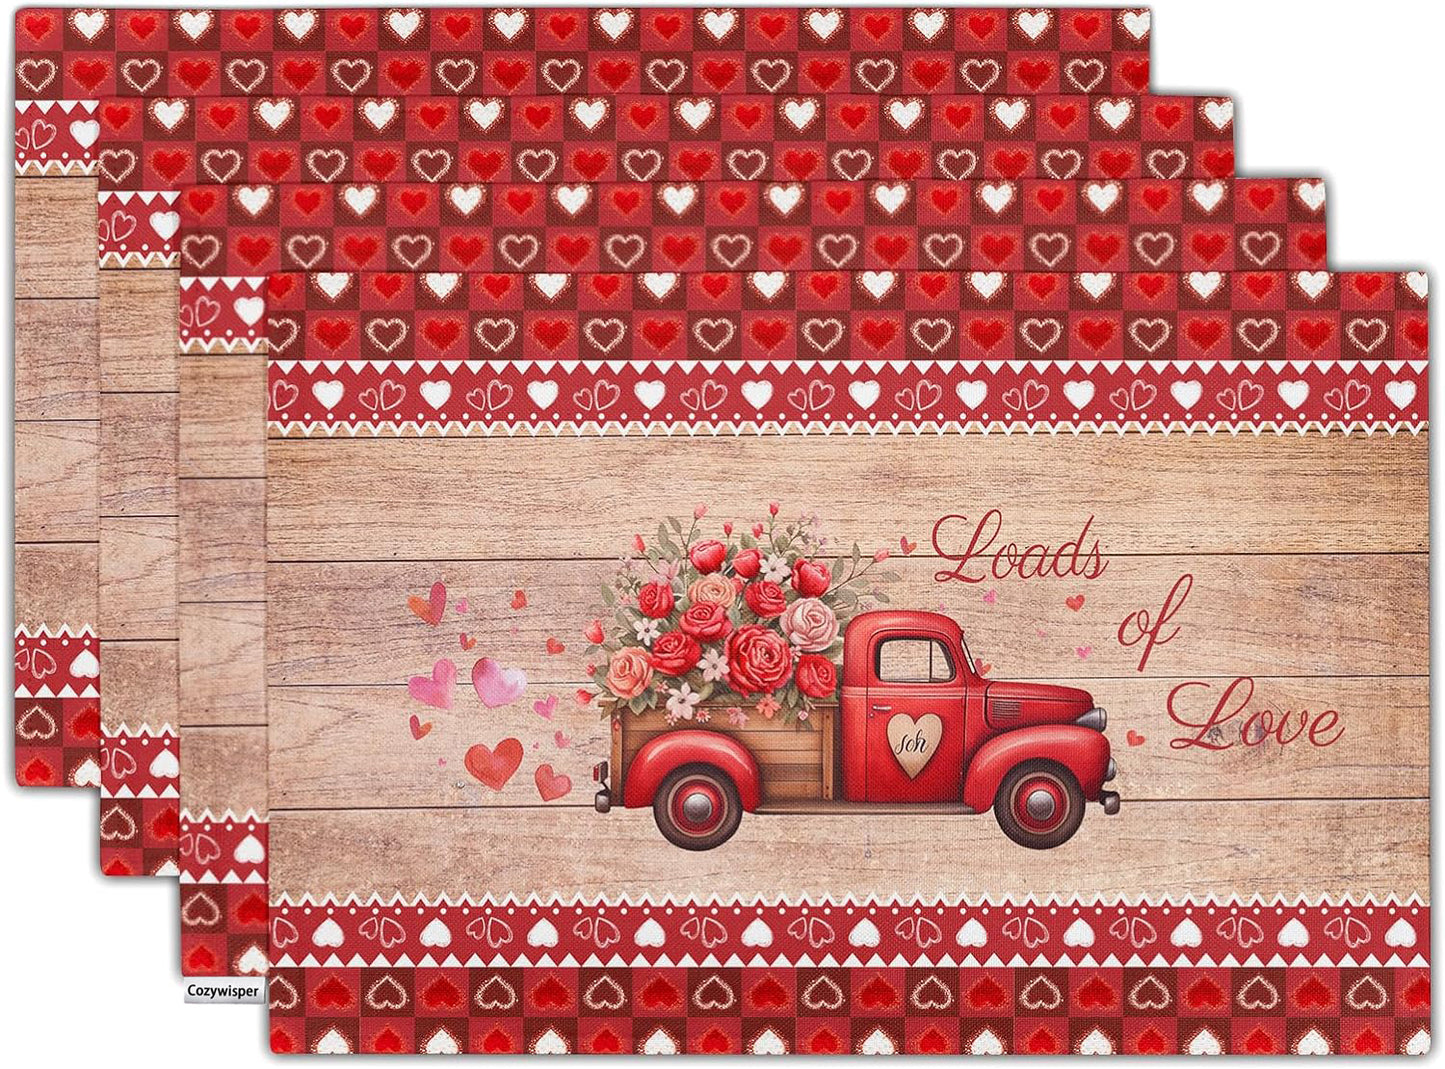 Cozywisper Valentines Day Linen Placemats Set of 4 12x18 Inch Red Lovve Heart Roses Truck Holiday Table Mat Heat-Resistant Washable Wipeable Place Mat for Party Kitchen Dining Home Decor